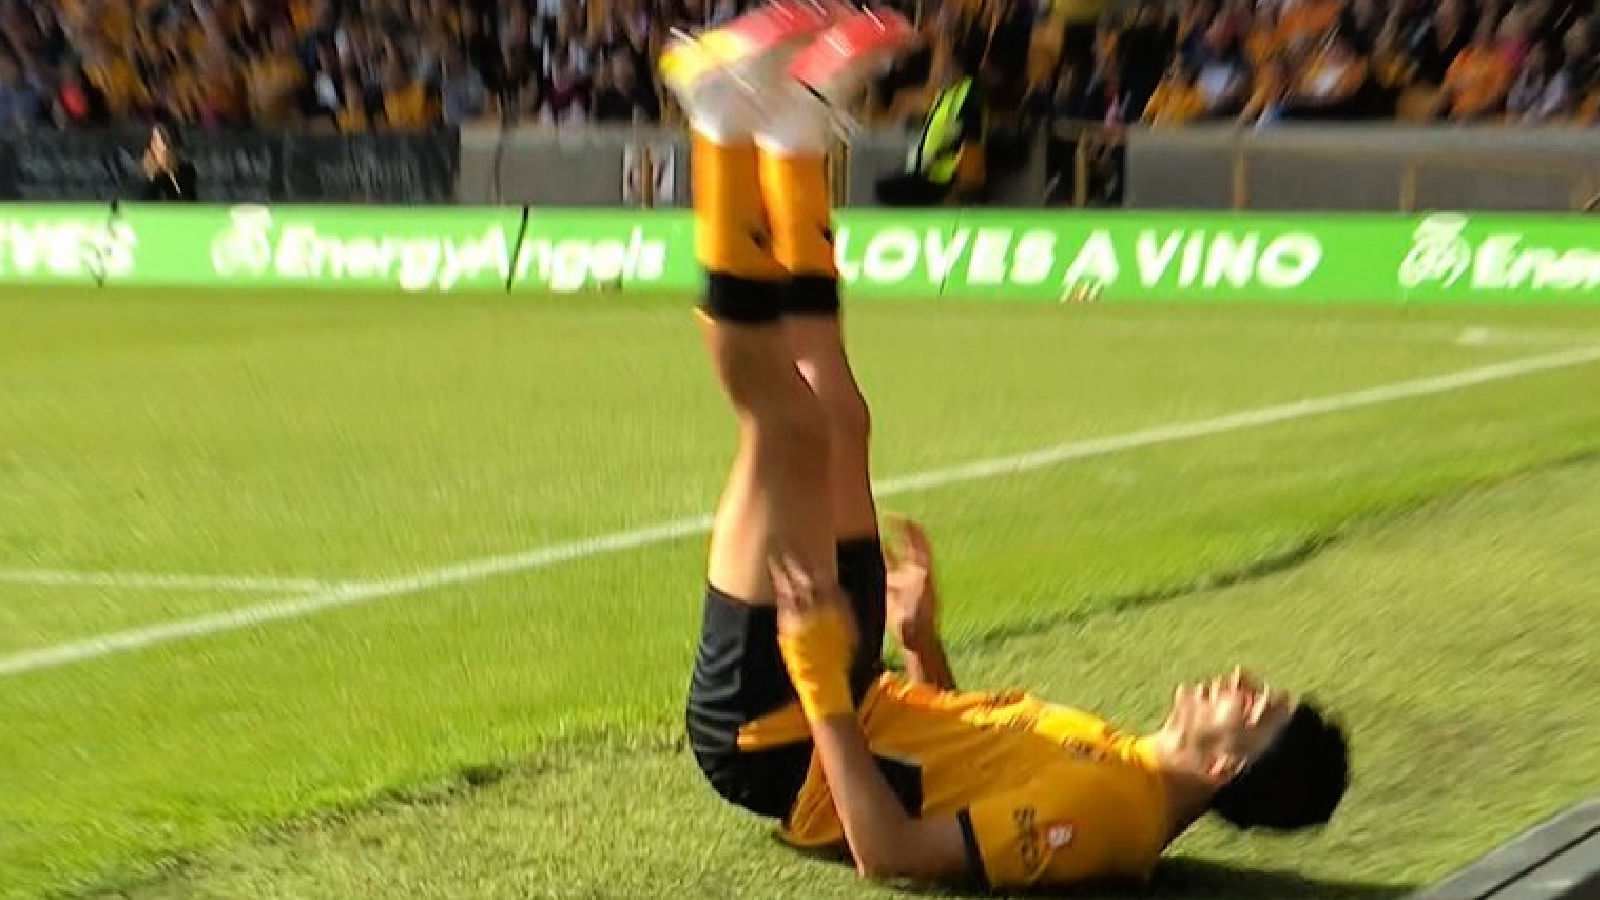 Raul Jimenez on the floor after failing to execute a rabona pass against Brentford